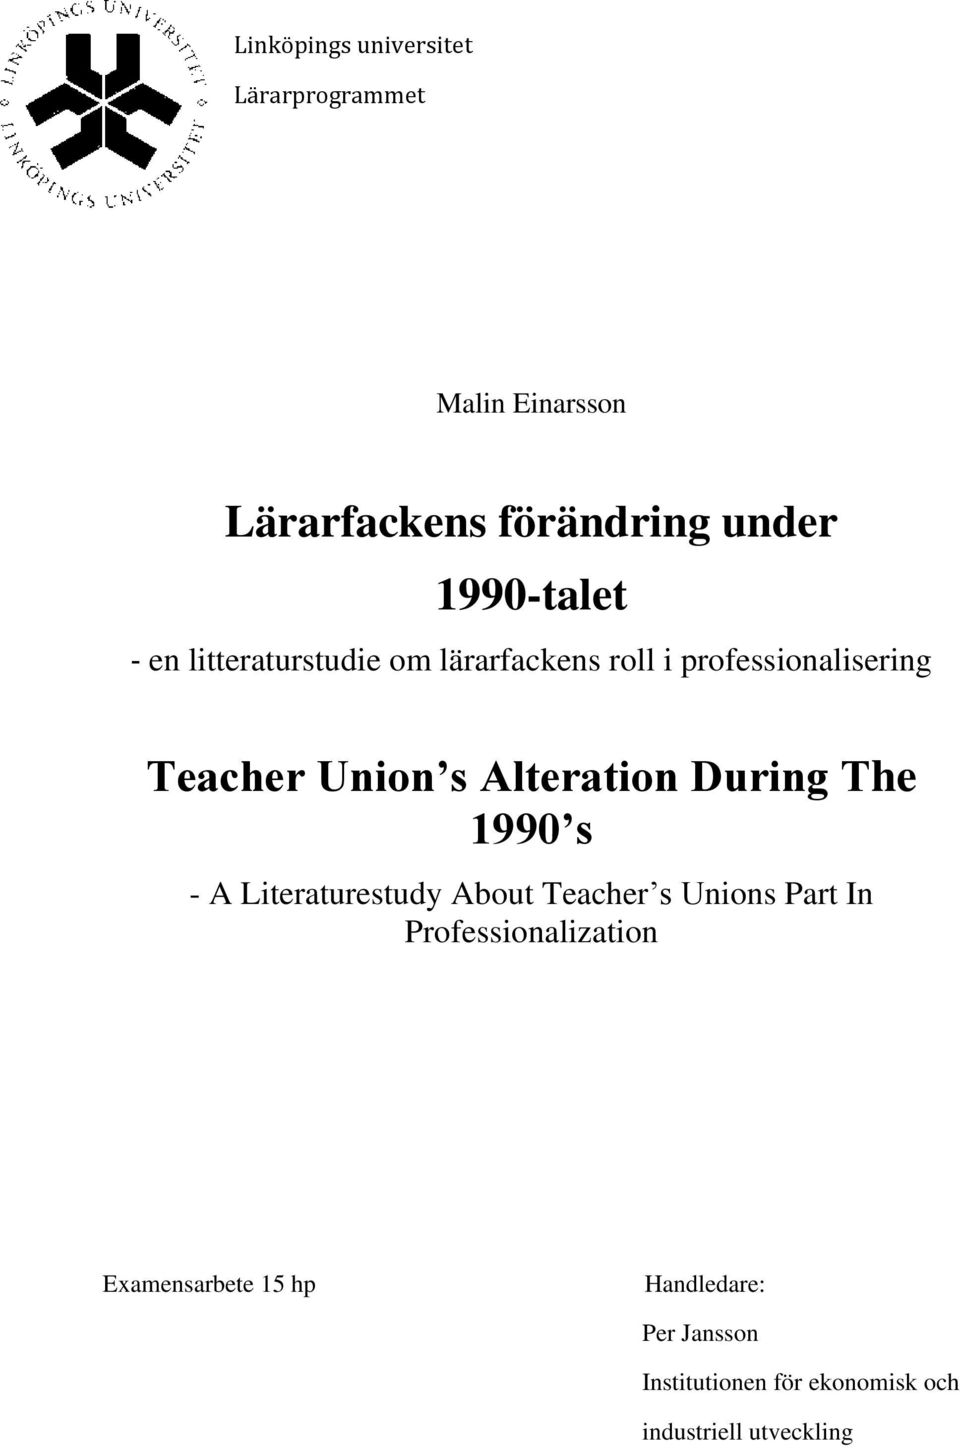 Alteration During The 1990 s - A Literaturestudy About Teacher s Unions Part In